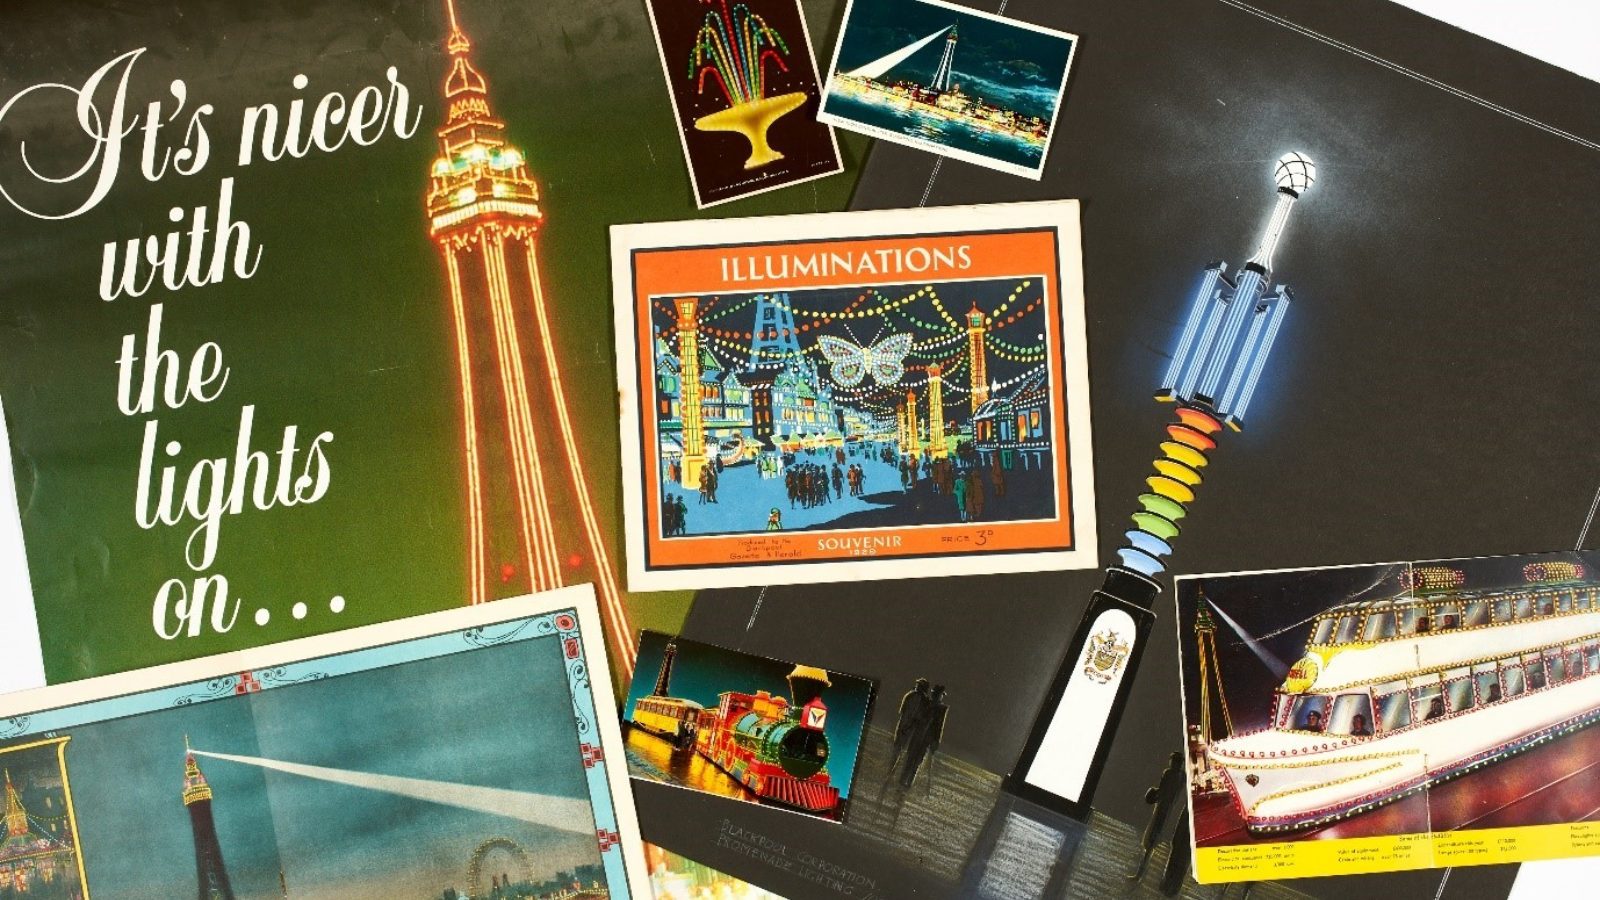 Illuminations posters and post cards including a poster of the illuminated blackpool tower